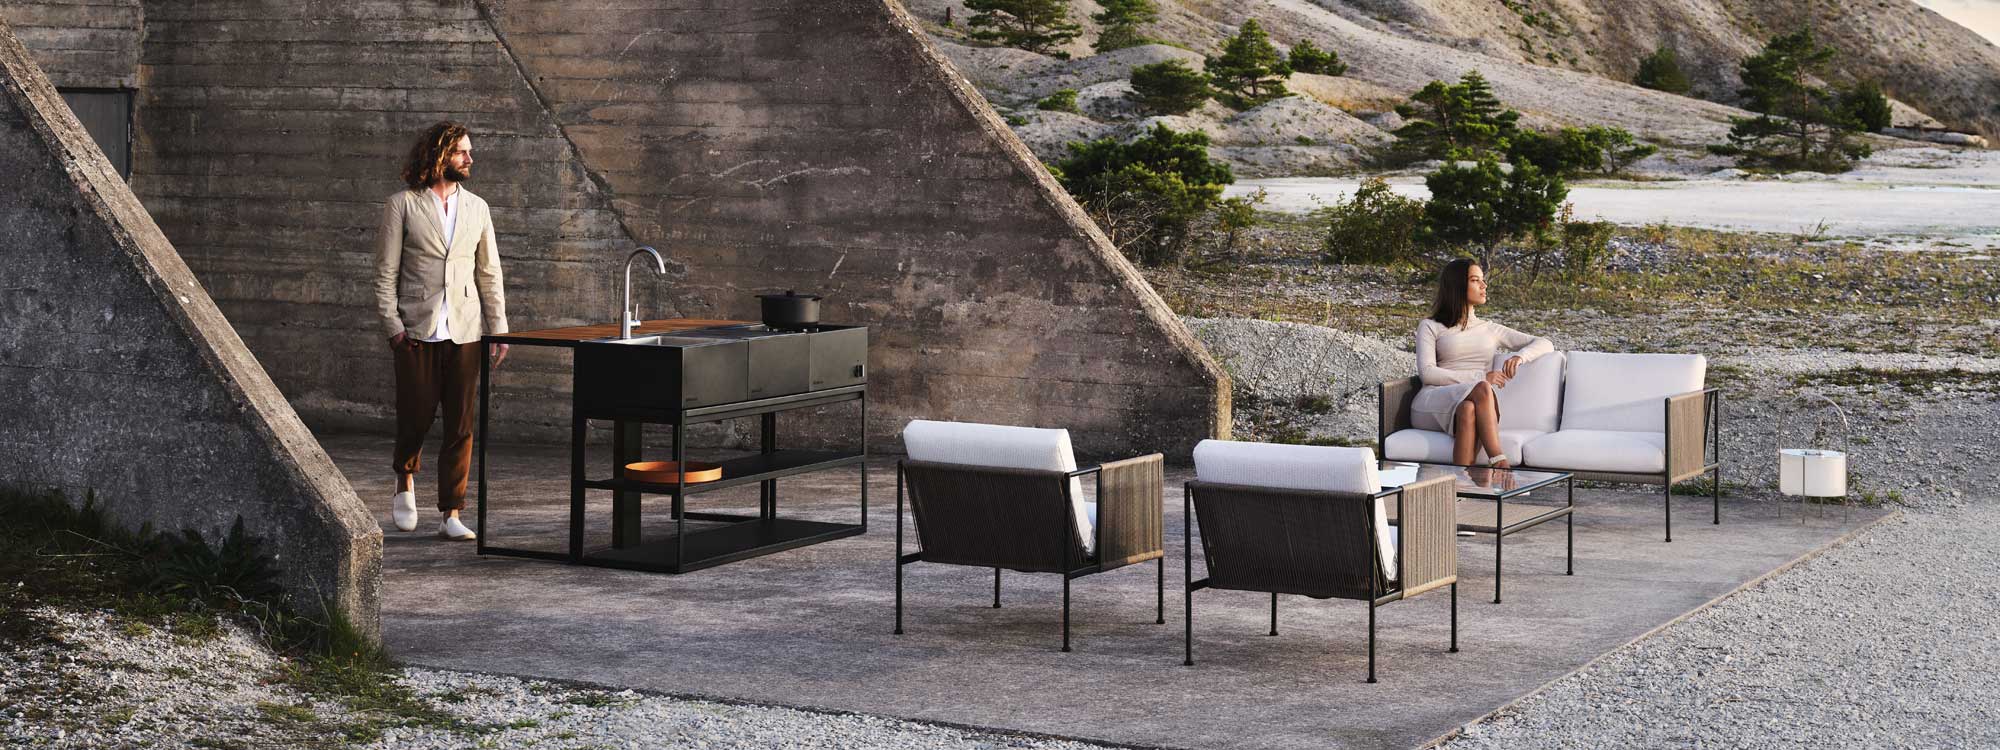 Antibes outdoor lounge set includes a garden easy chair, a 2 seat garden sofa & low tables by Roshults modern garden furniture - Sweden.